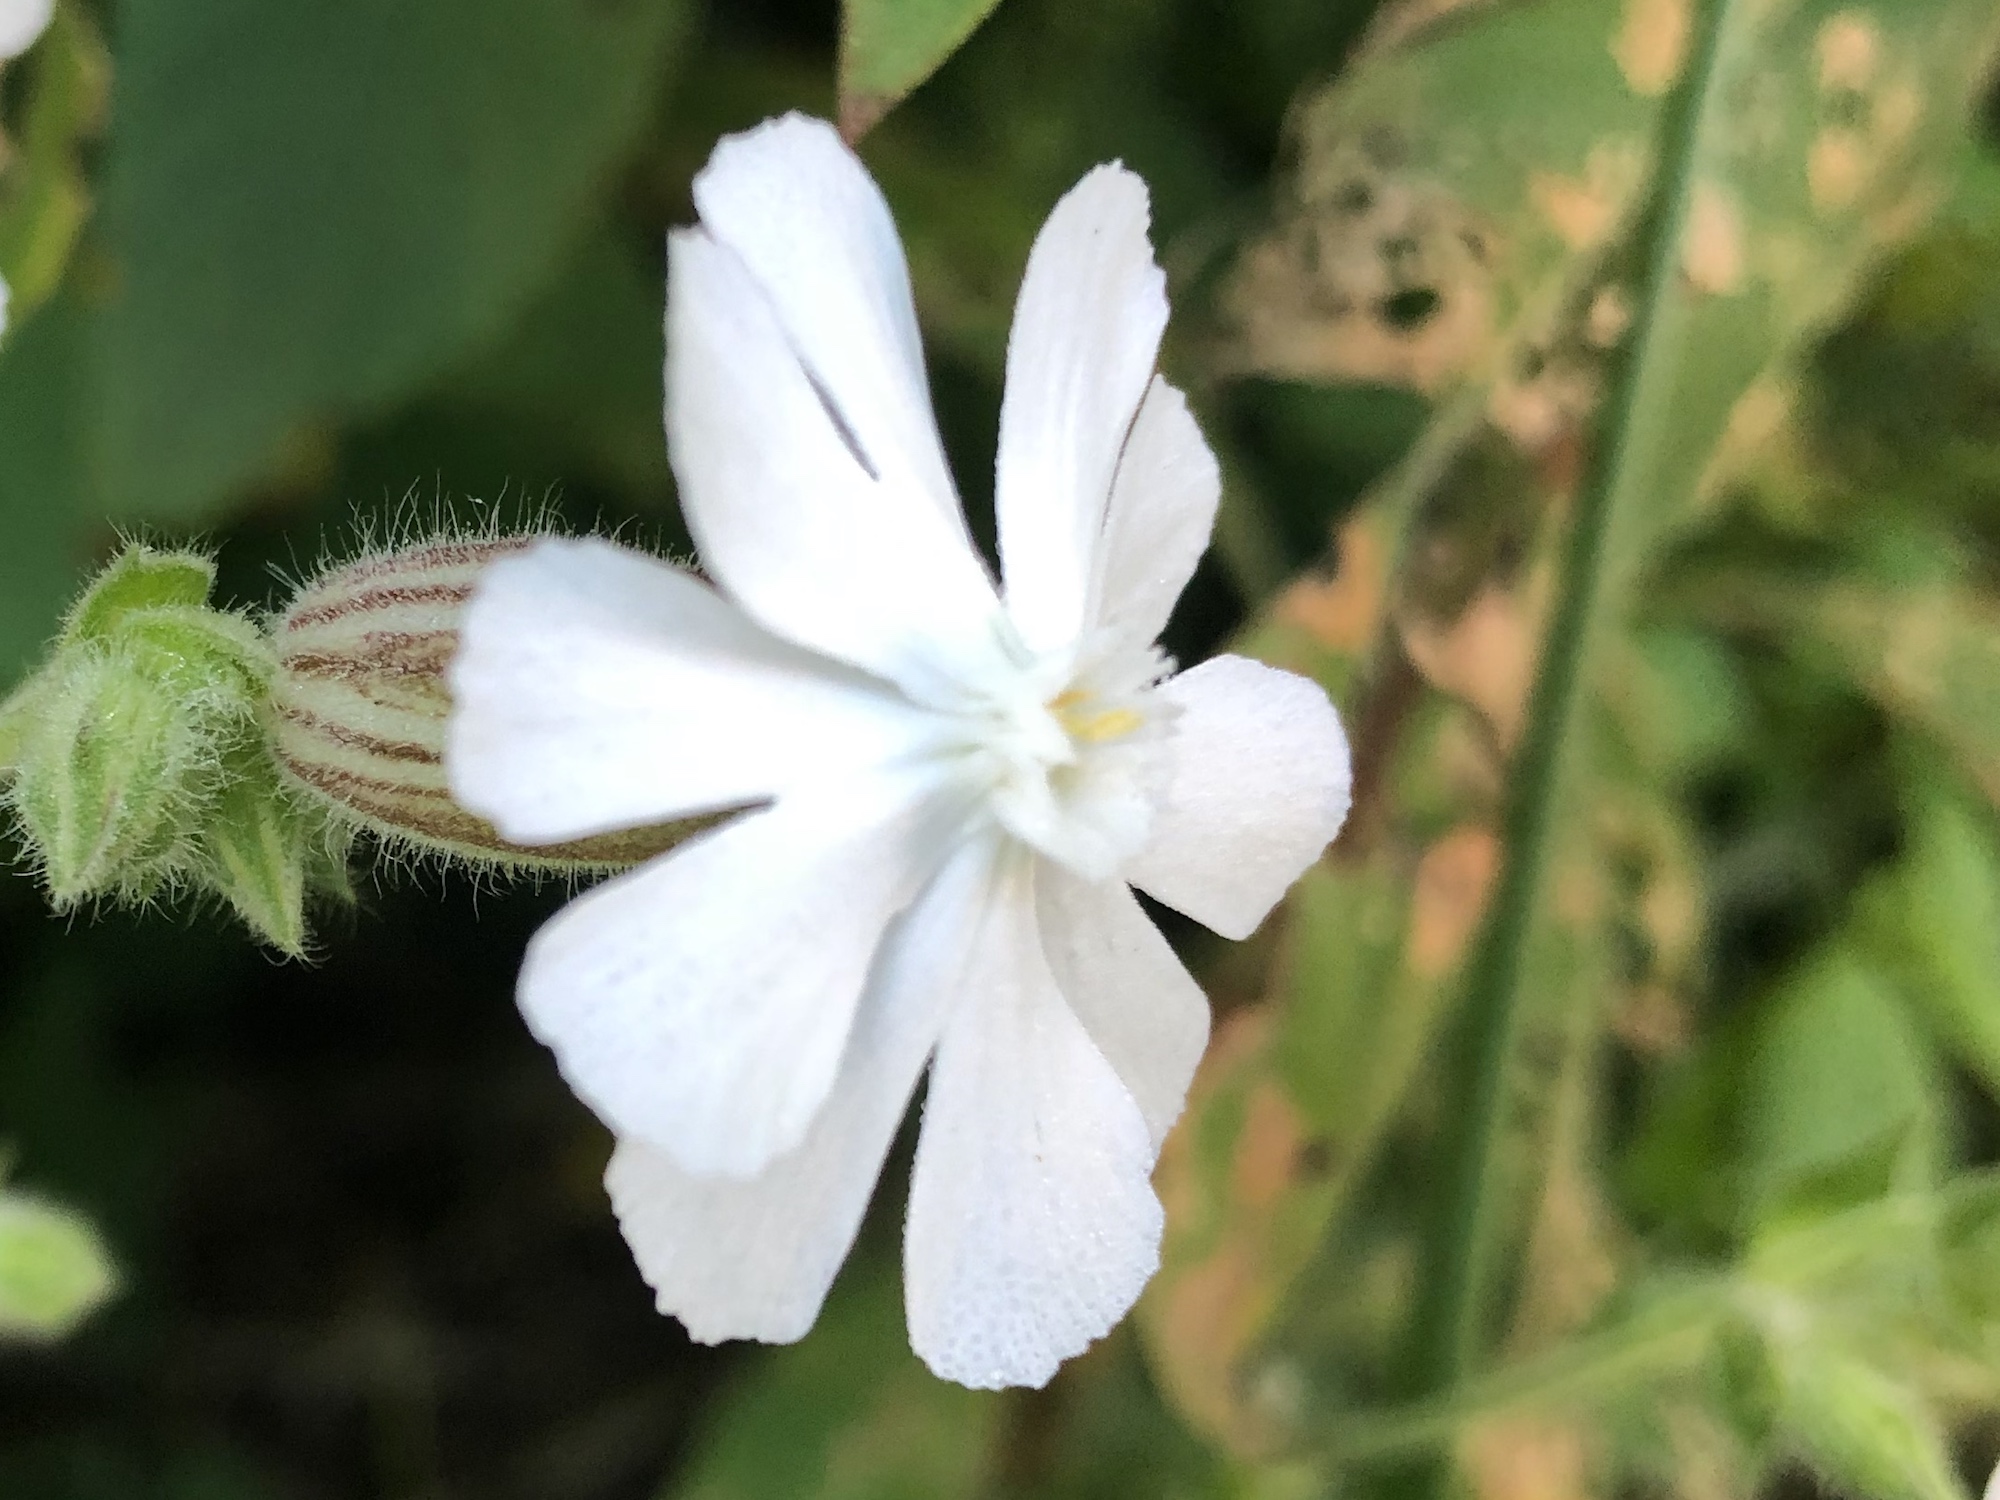 White Campion on banks of Retaining Pond on August 1, 2019.